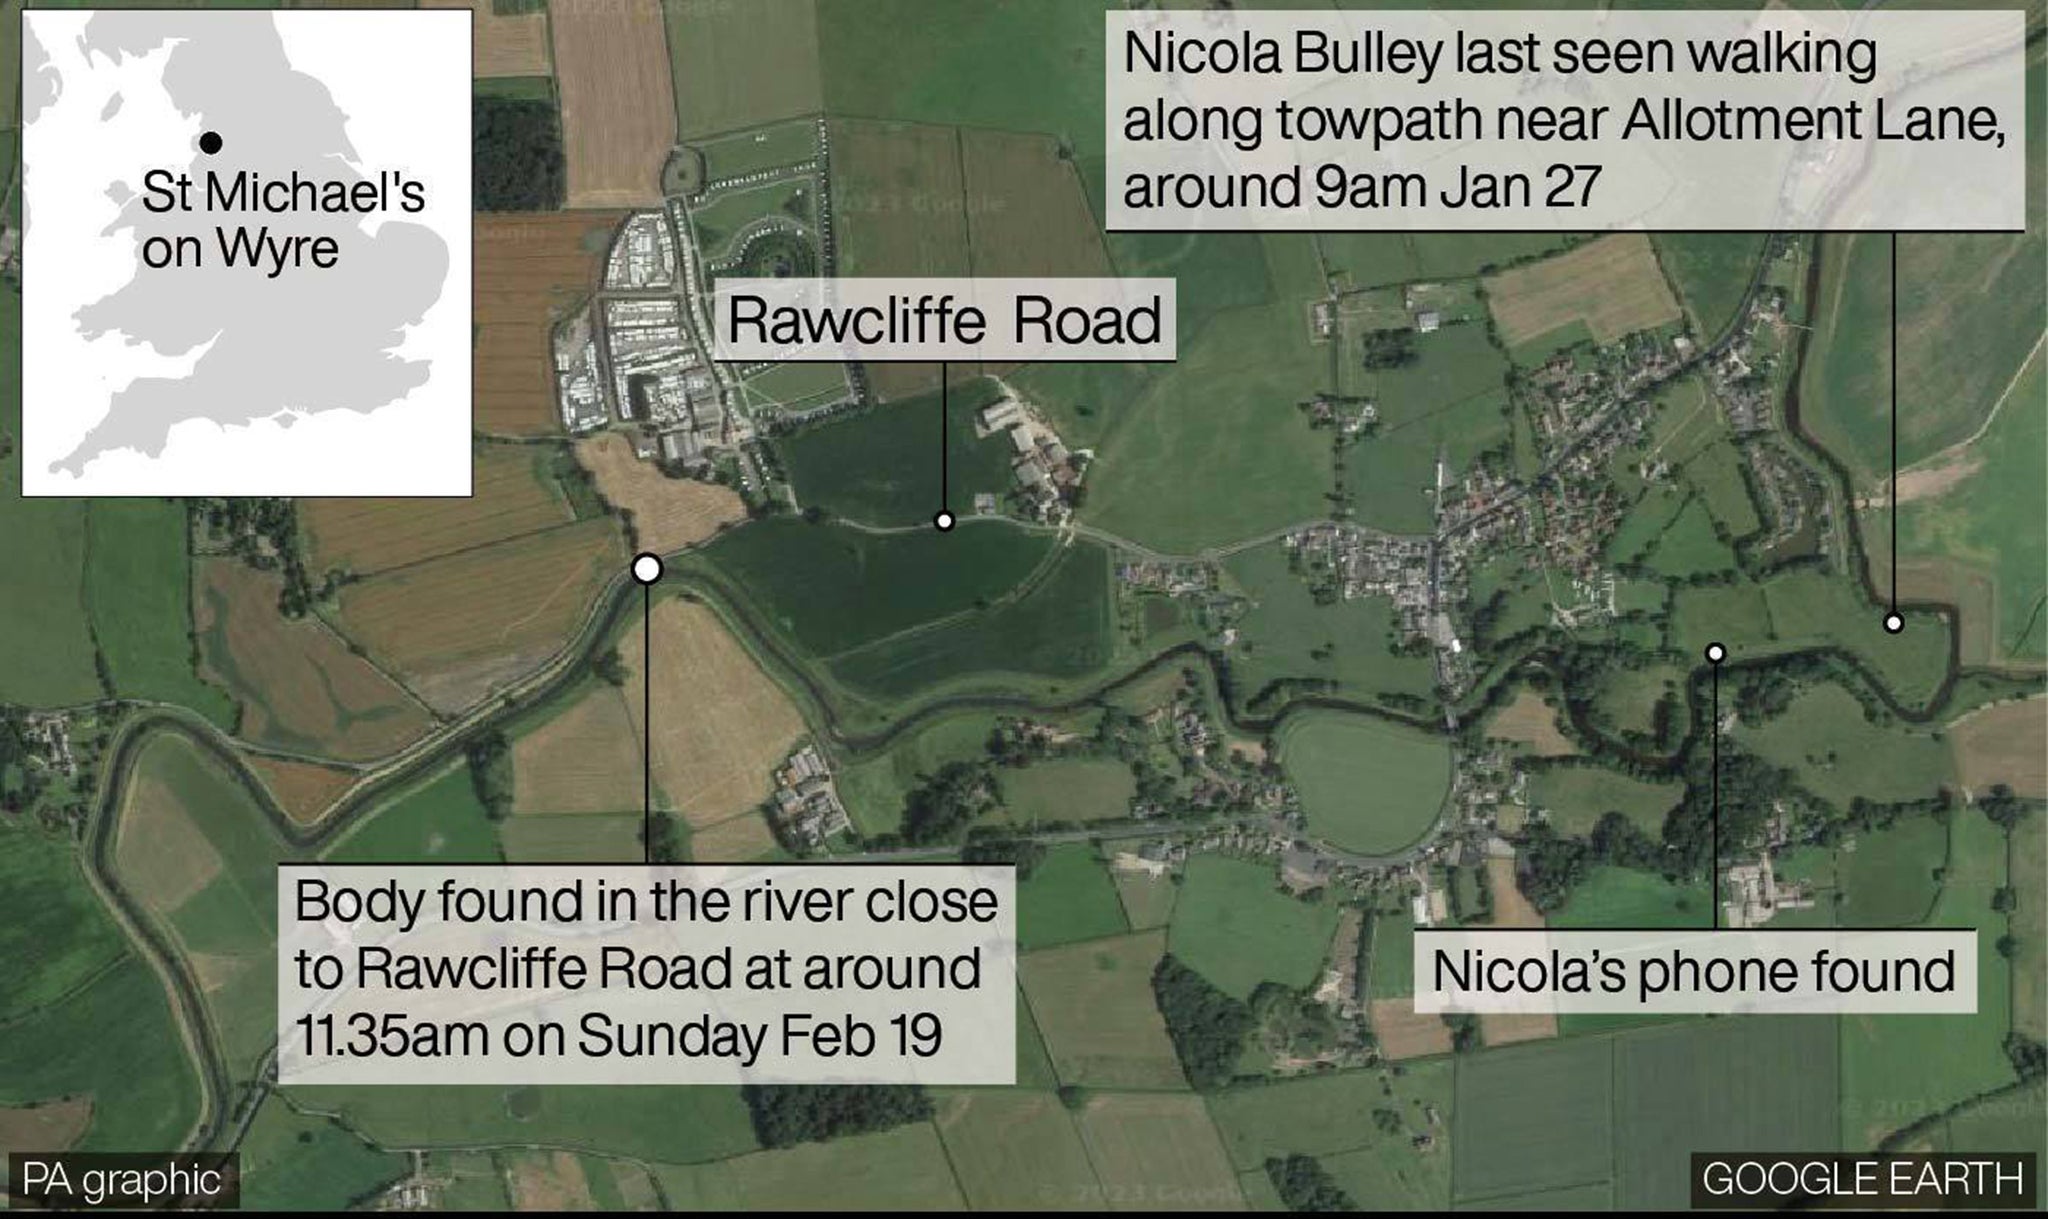 A map showing the exact location where a body in the search for missing dog walker Nicola Bulley was found